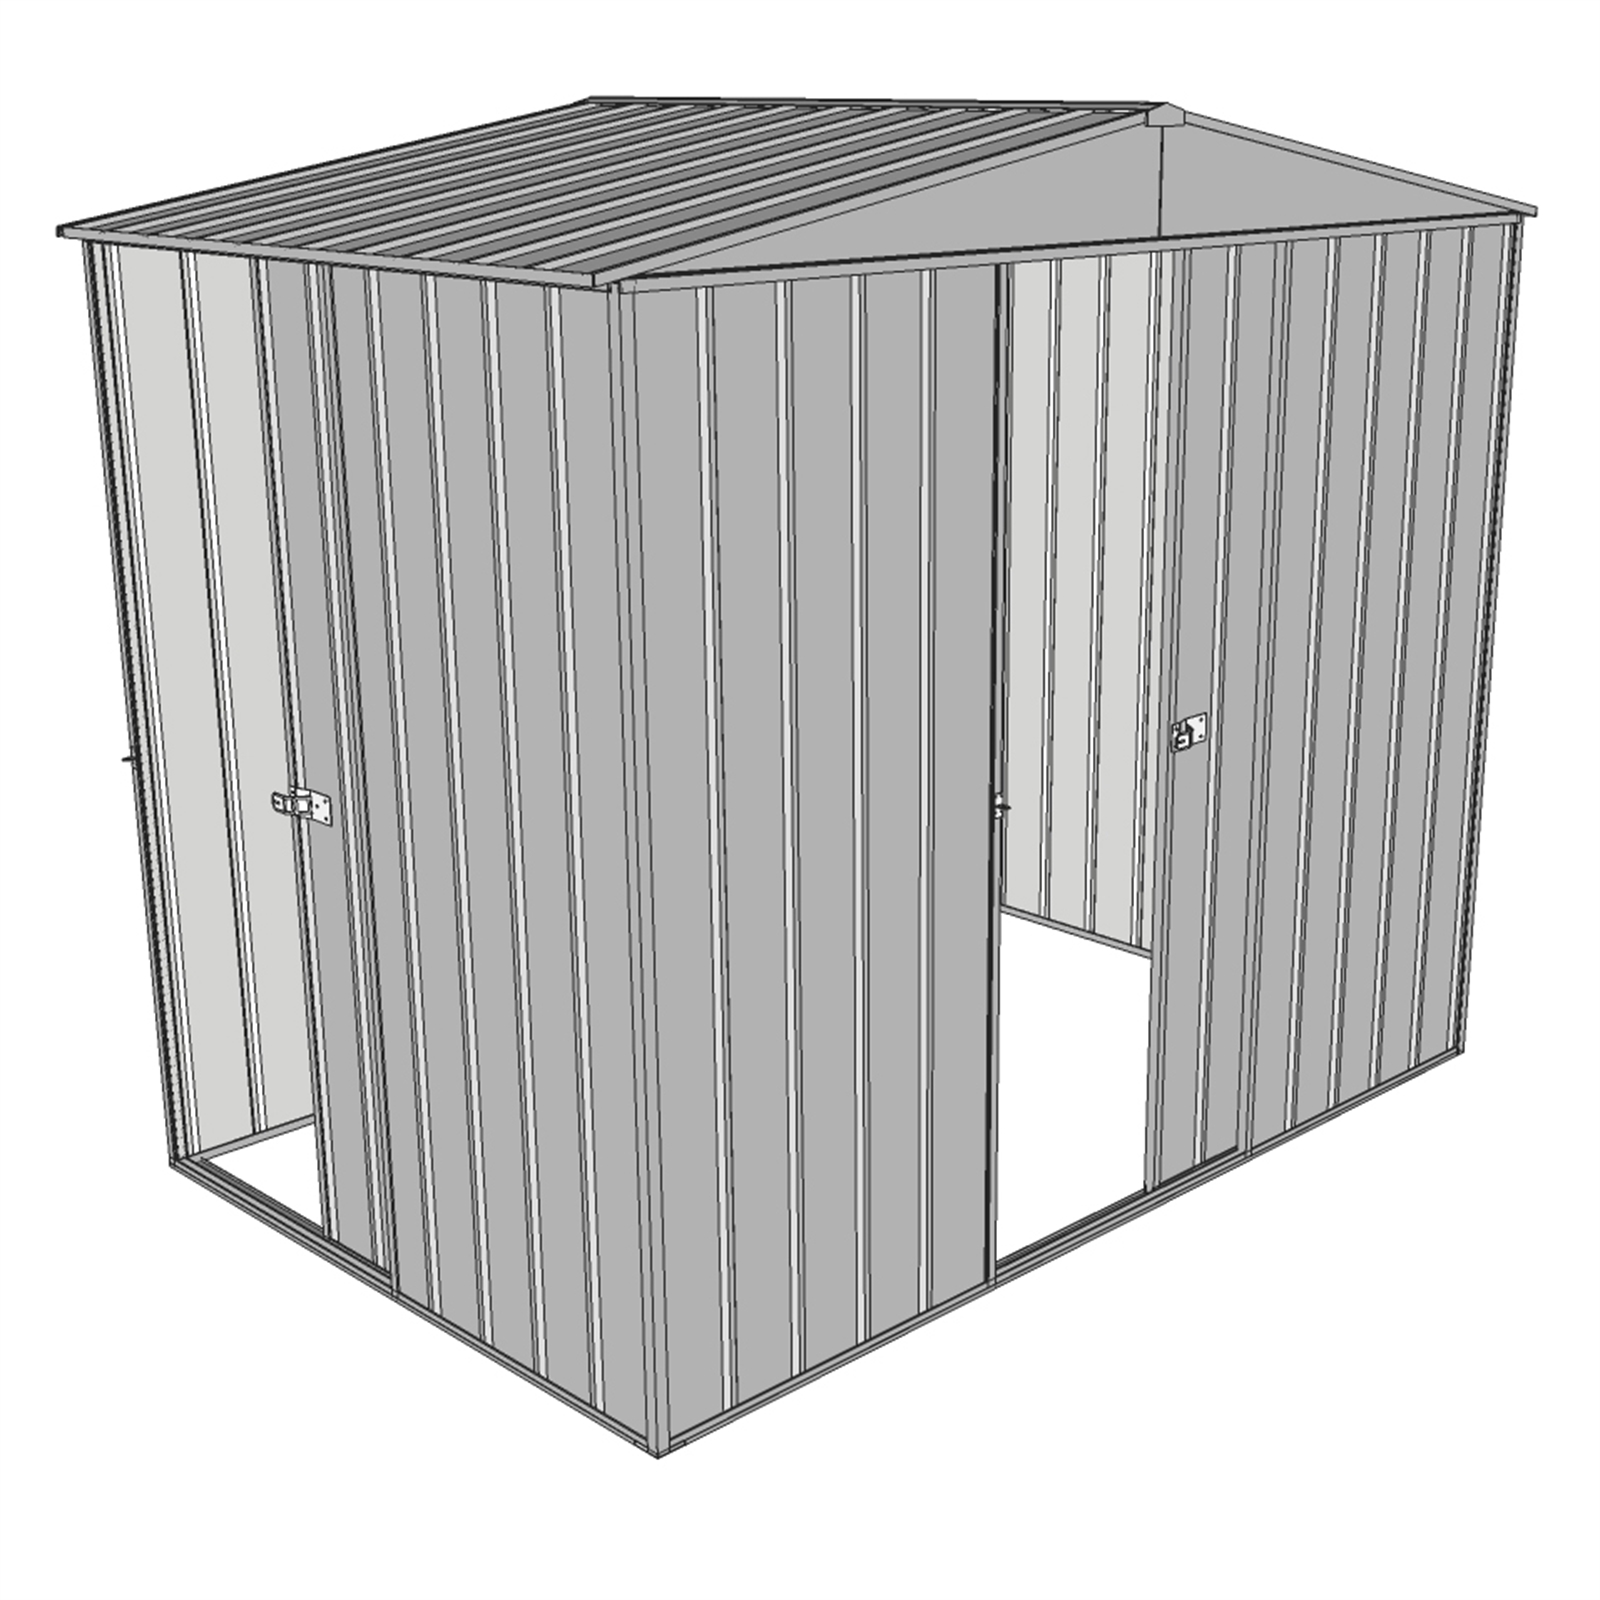 Build-a-Shed 2.3 x 2.3 x 1.5m Zinc Front Gable Two Single Sliding Doors Narrow Shed